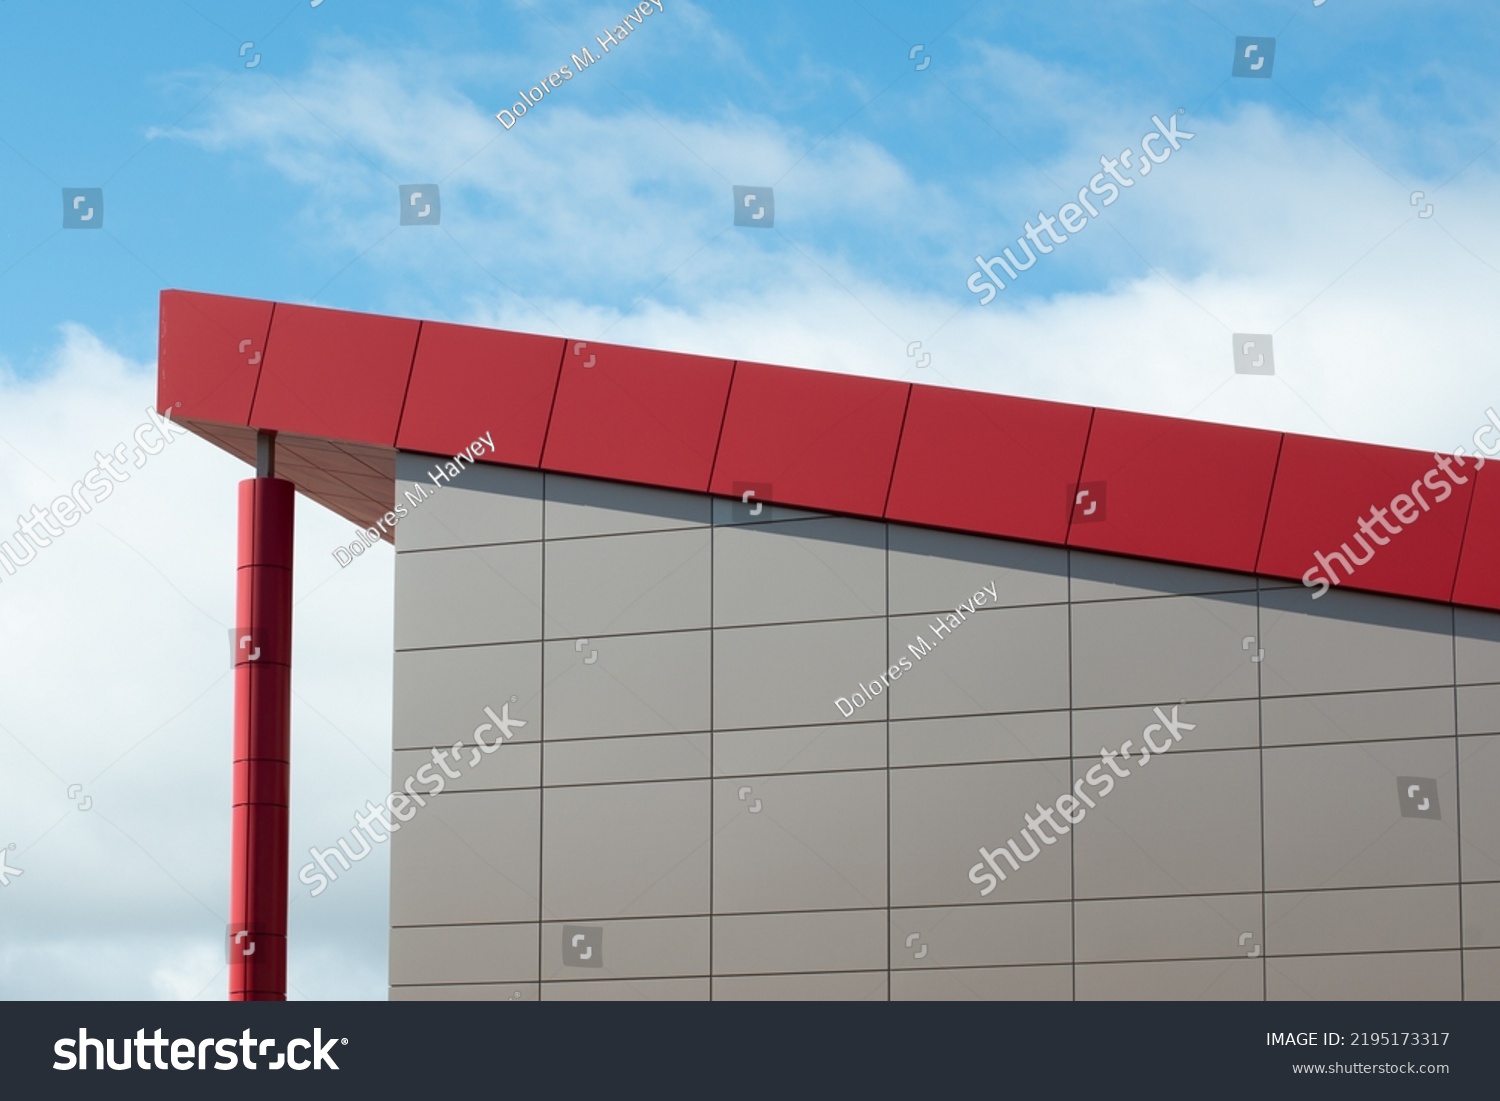 The exterior wall of a contemporary commercial style building with aluminum metal composite panels and glass windows. The futuristic building has engineered diagonal cladding steel frame panels. #2195173317